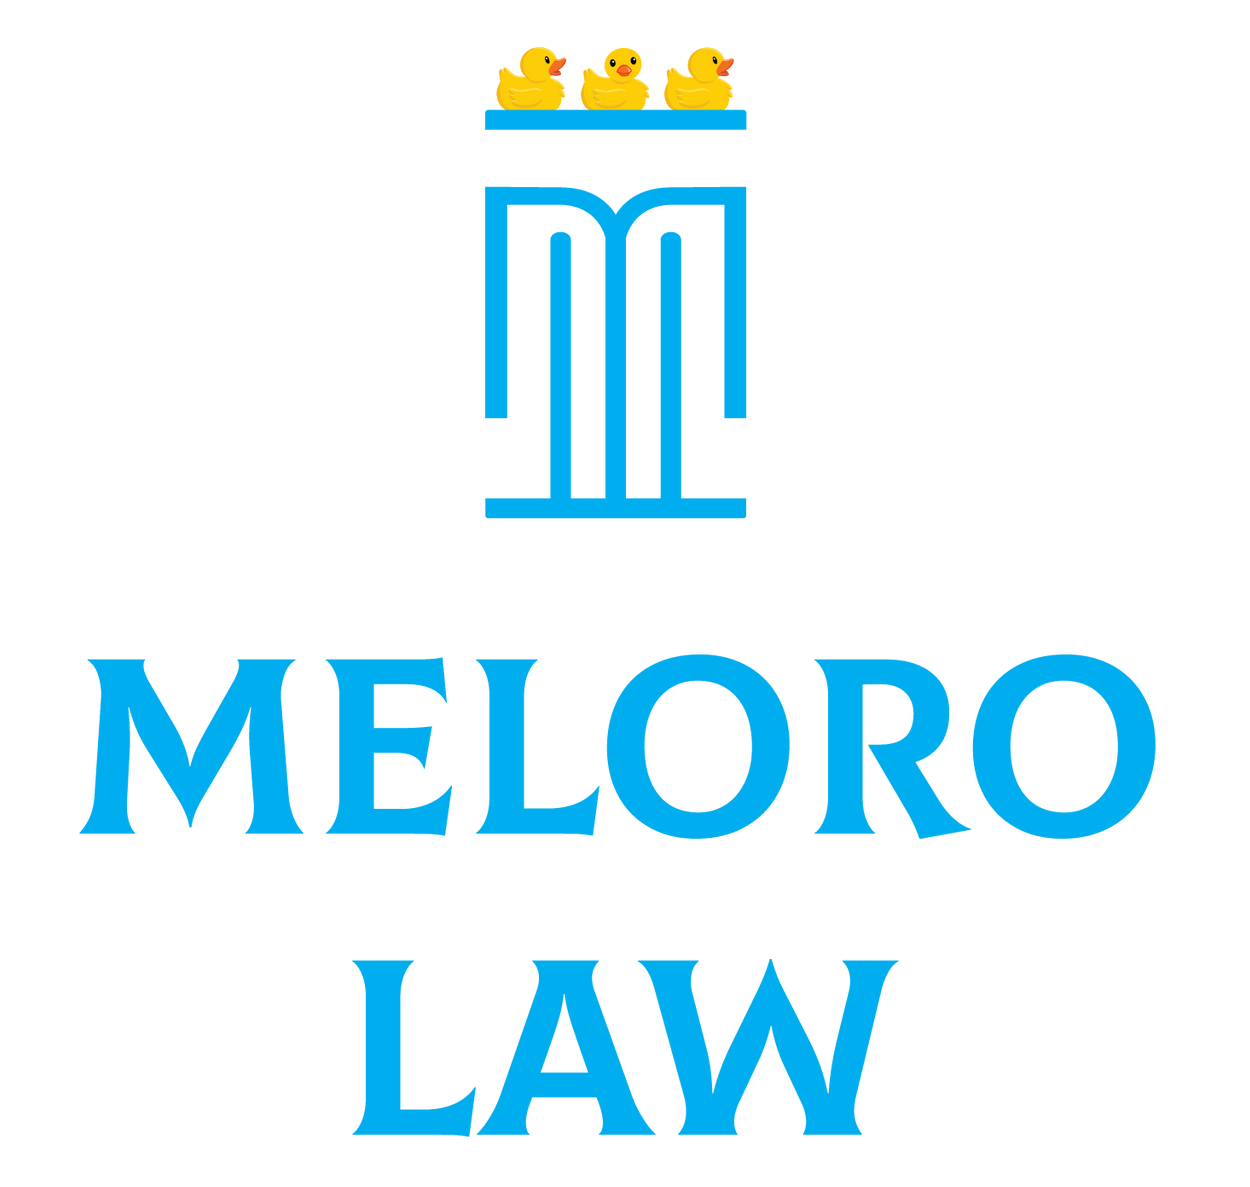 The logo for meloro law has three rubber ducks on it